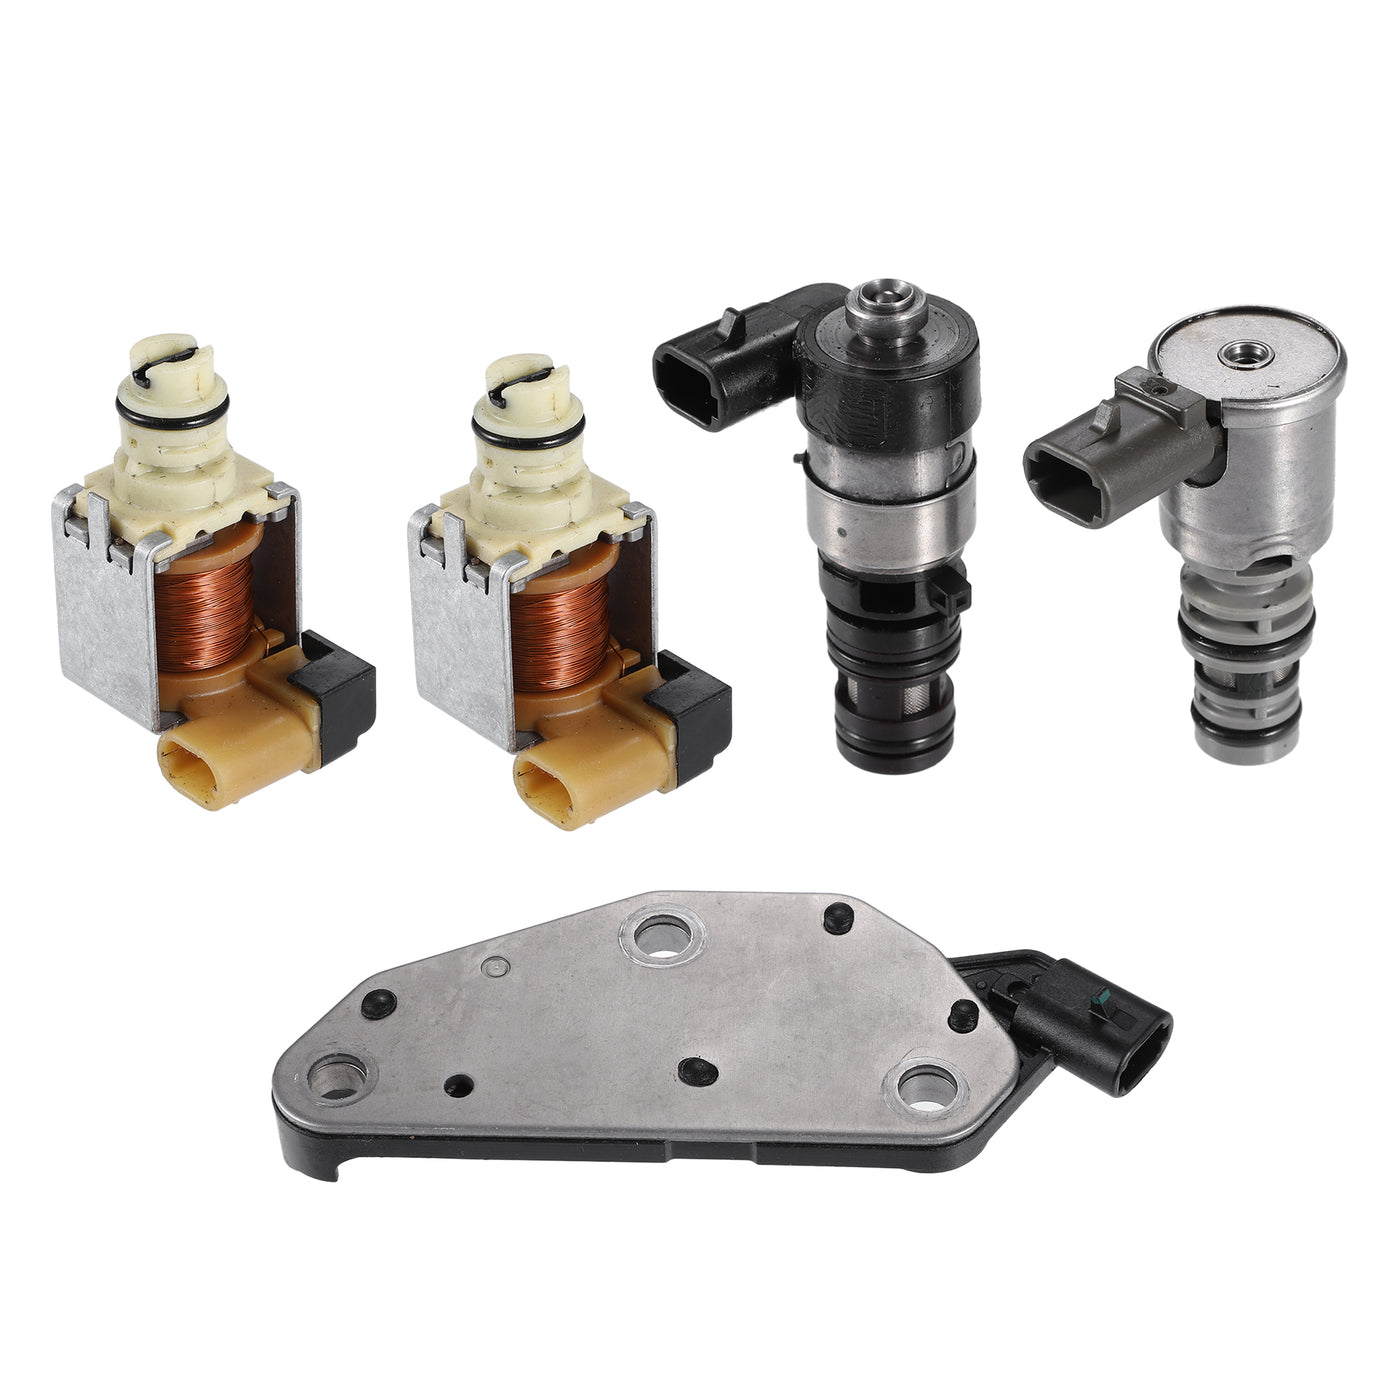 uxcell Uxcell Car Auto Transmission Master Solenoid Kit for Buick Regal 2003-2004 No.24225825